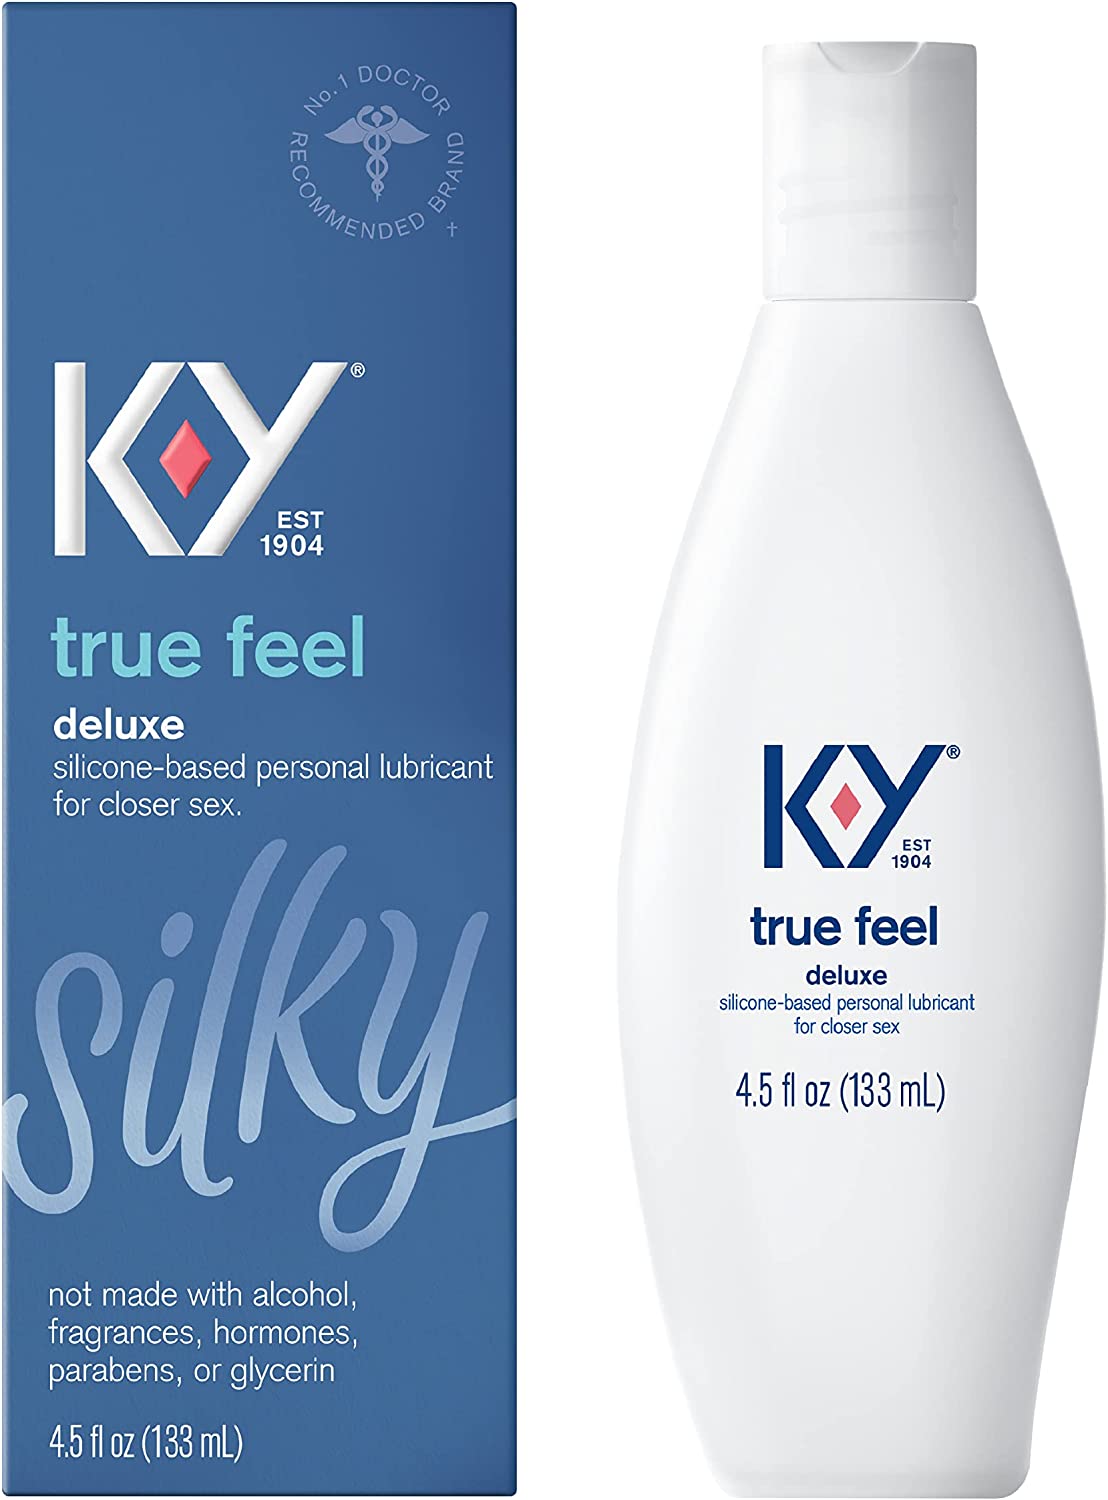 4.5-Oz K-Y True Feel Deluxe Silicone-Based Personal Lubricant $7.97 w/ S&S + Free Shipping w/ Prime or on $25+